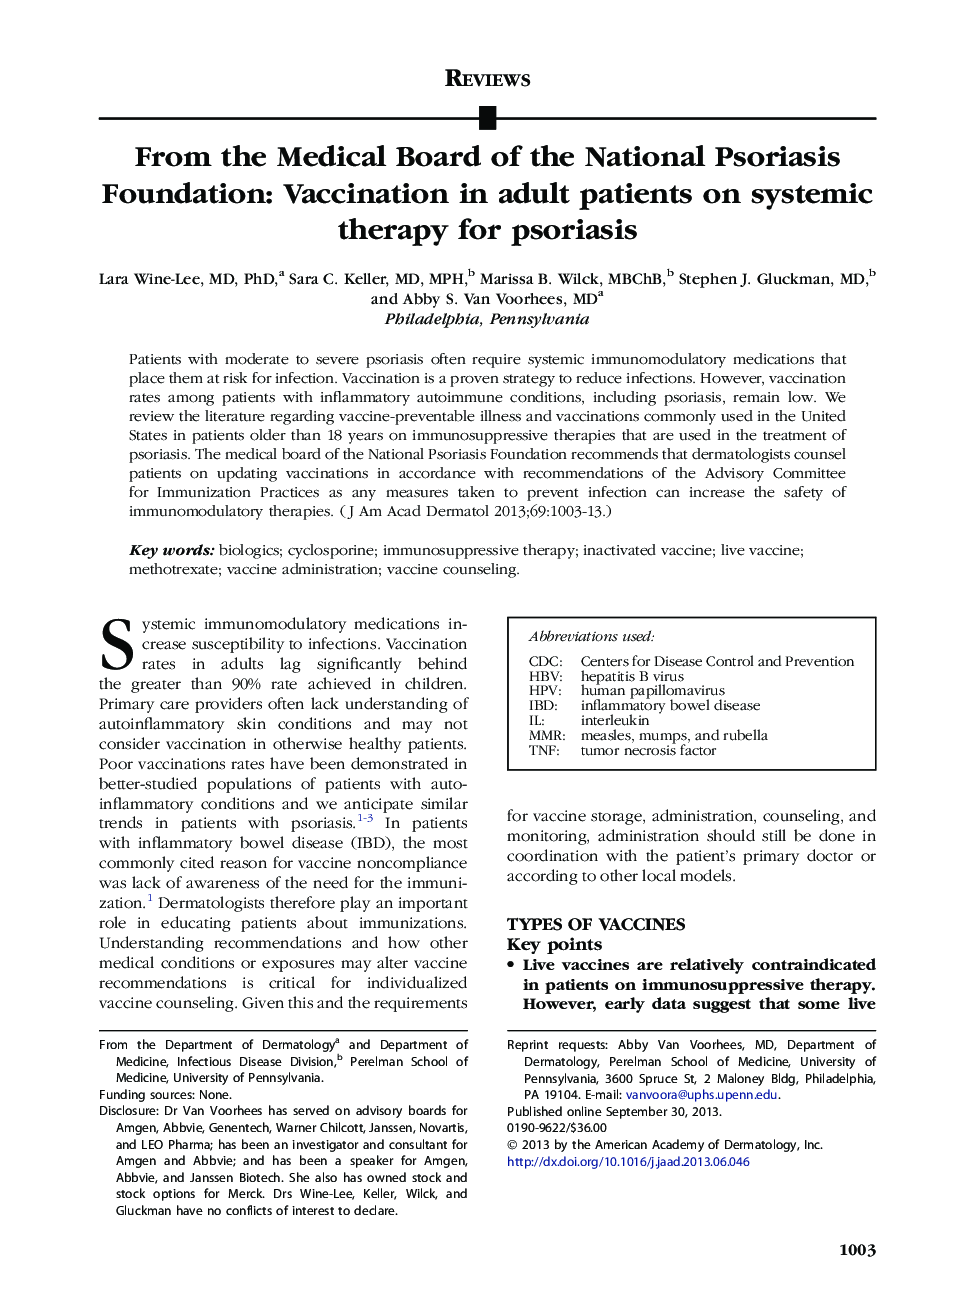 From the Medical Board of the National Psoriasis Foundation: Vaccination in adult patients on systemic therapy for psoriasis 